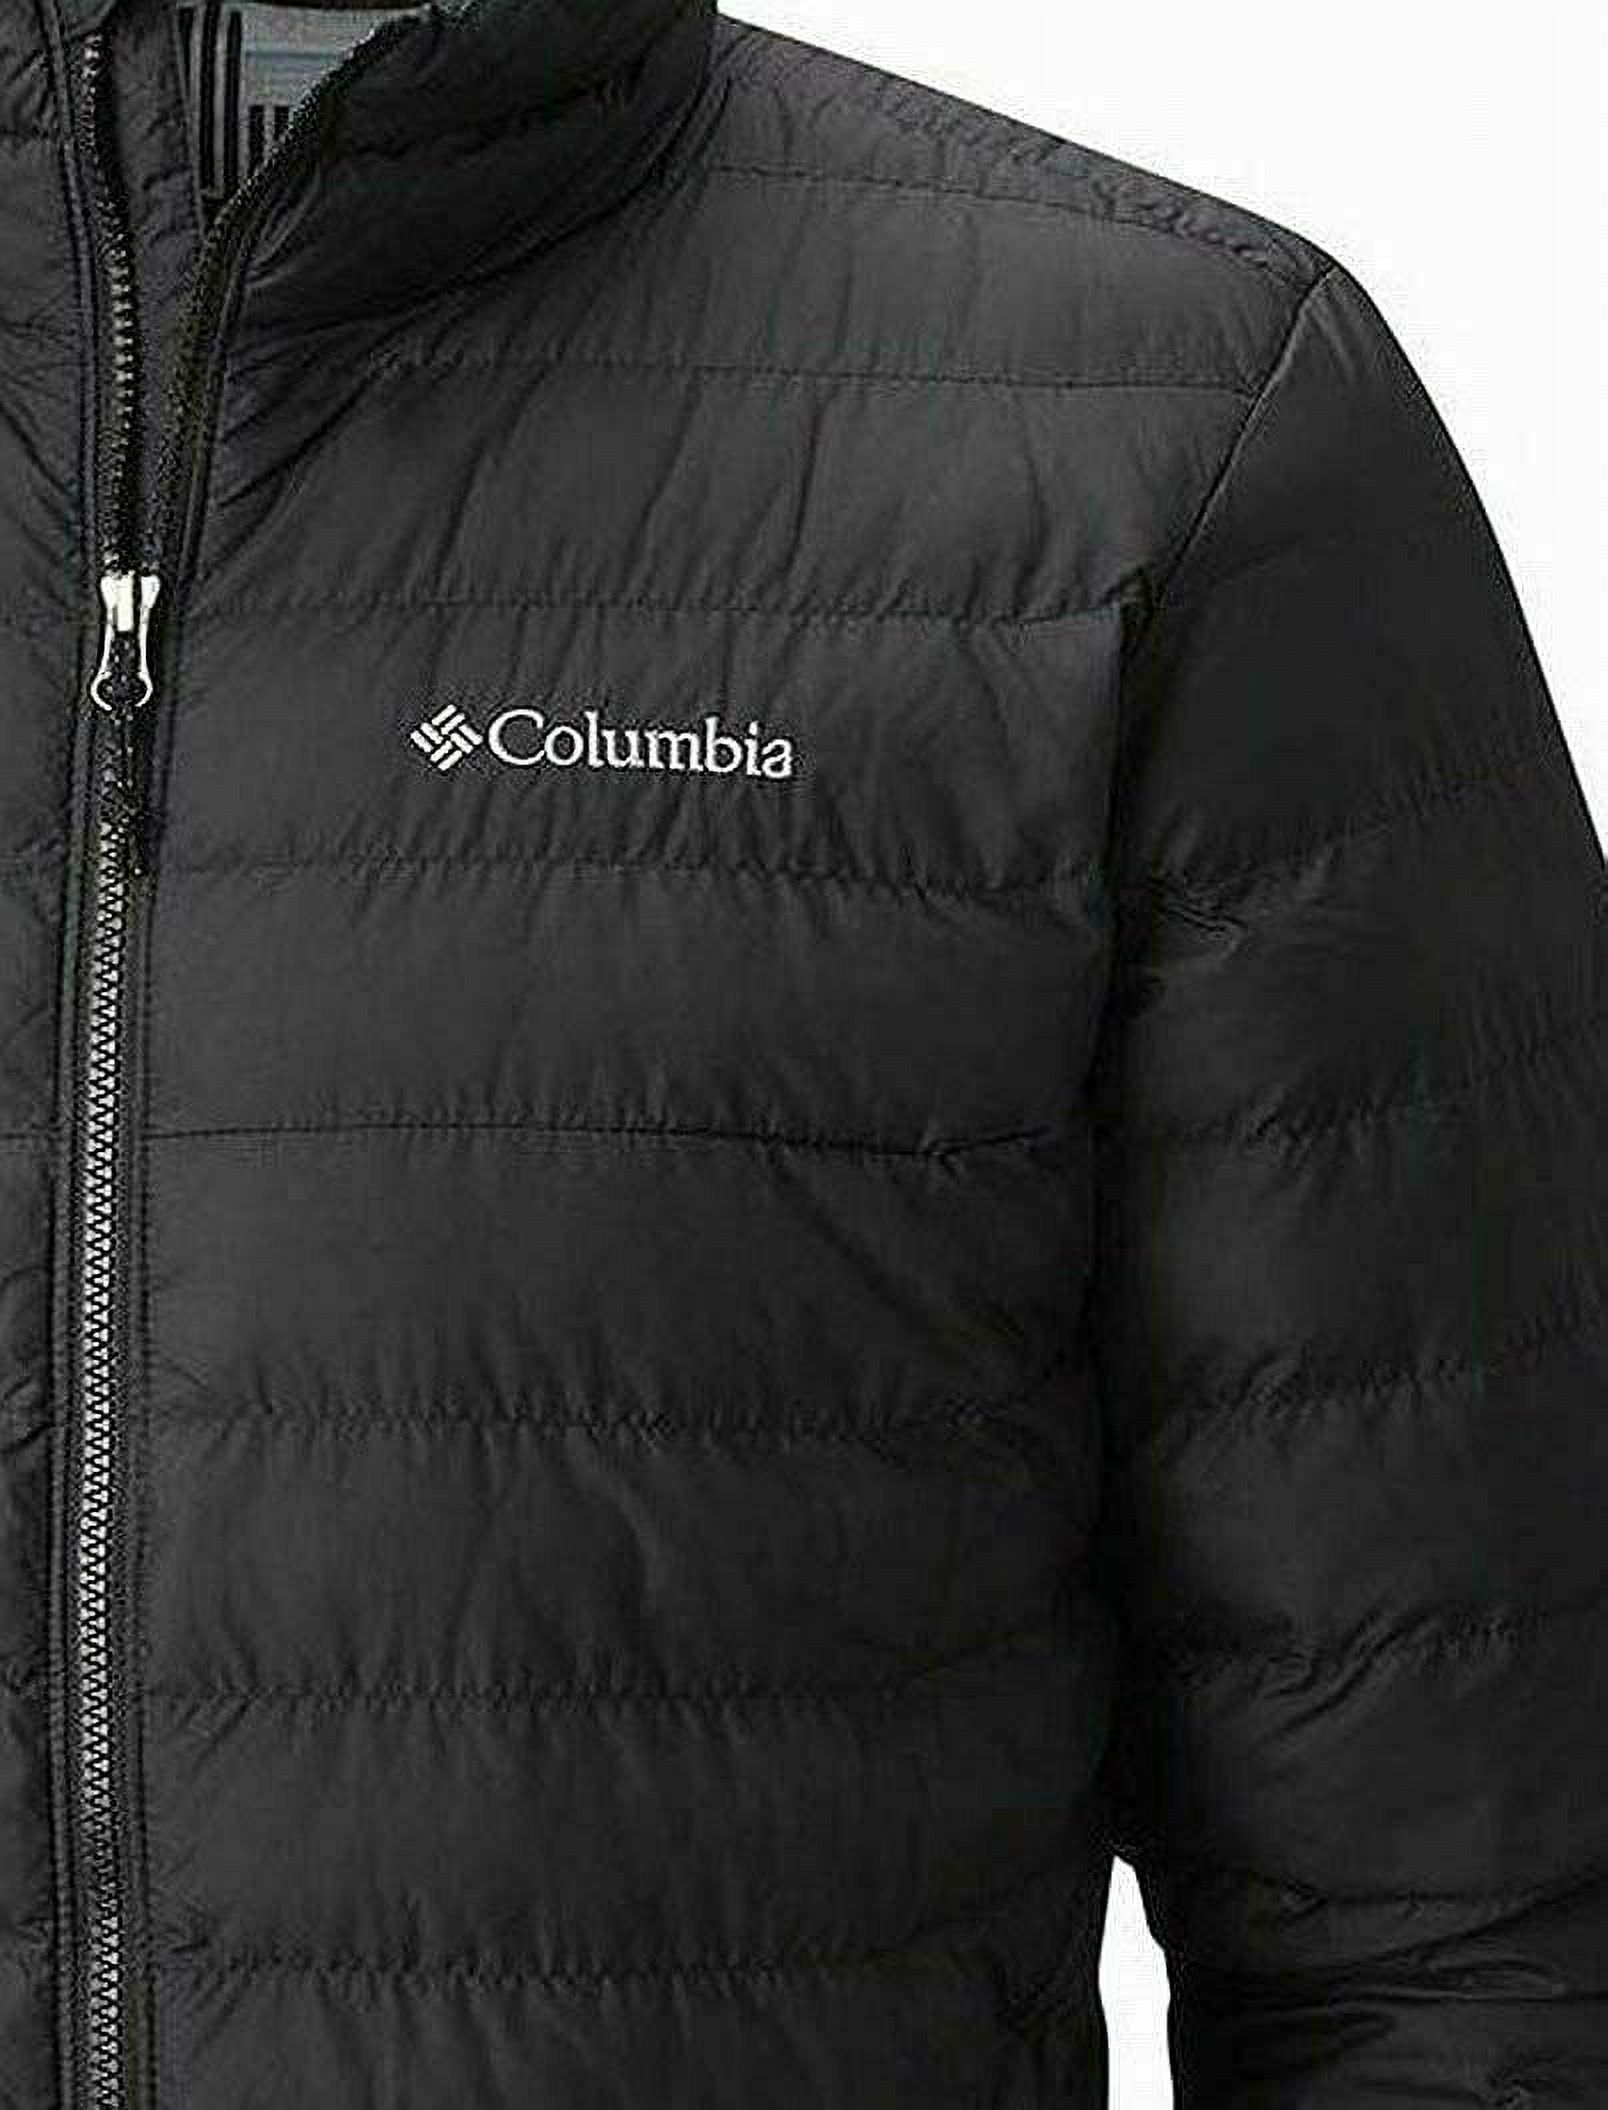 Columbia Men's Therma Coil Insulated Jacket (Black, L) - image 5 of 6